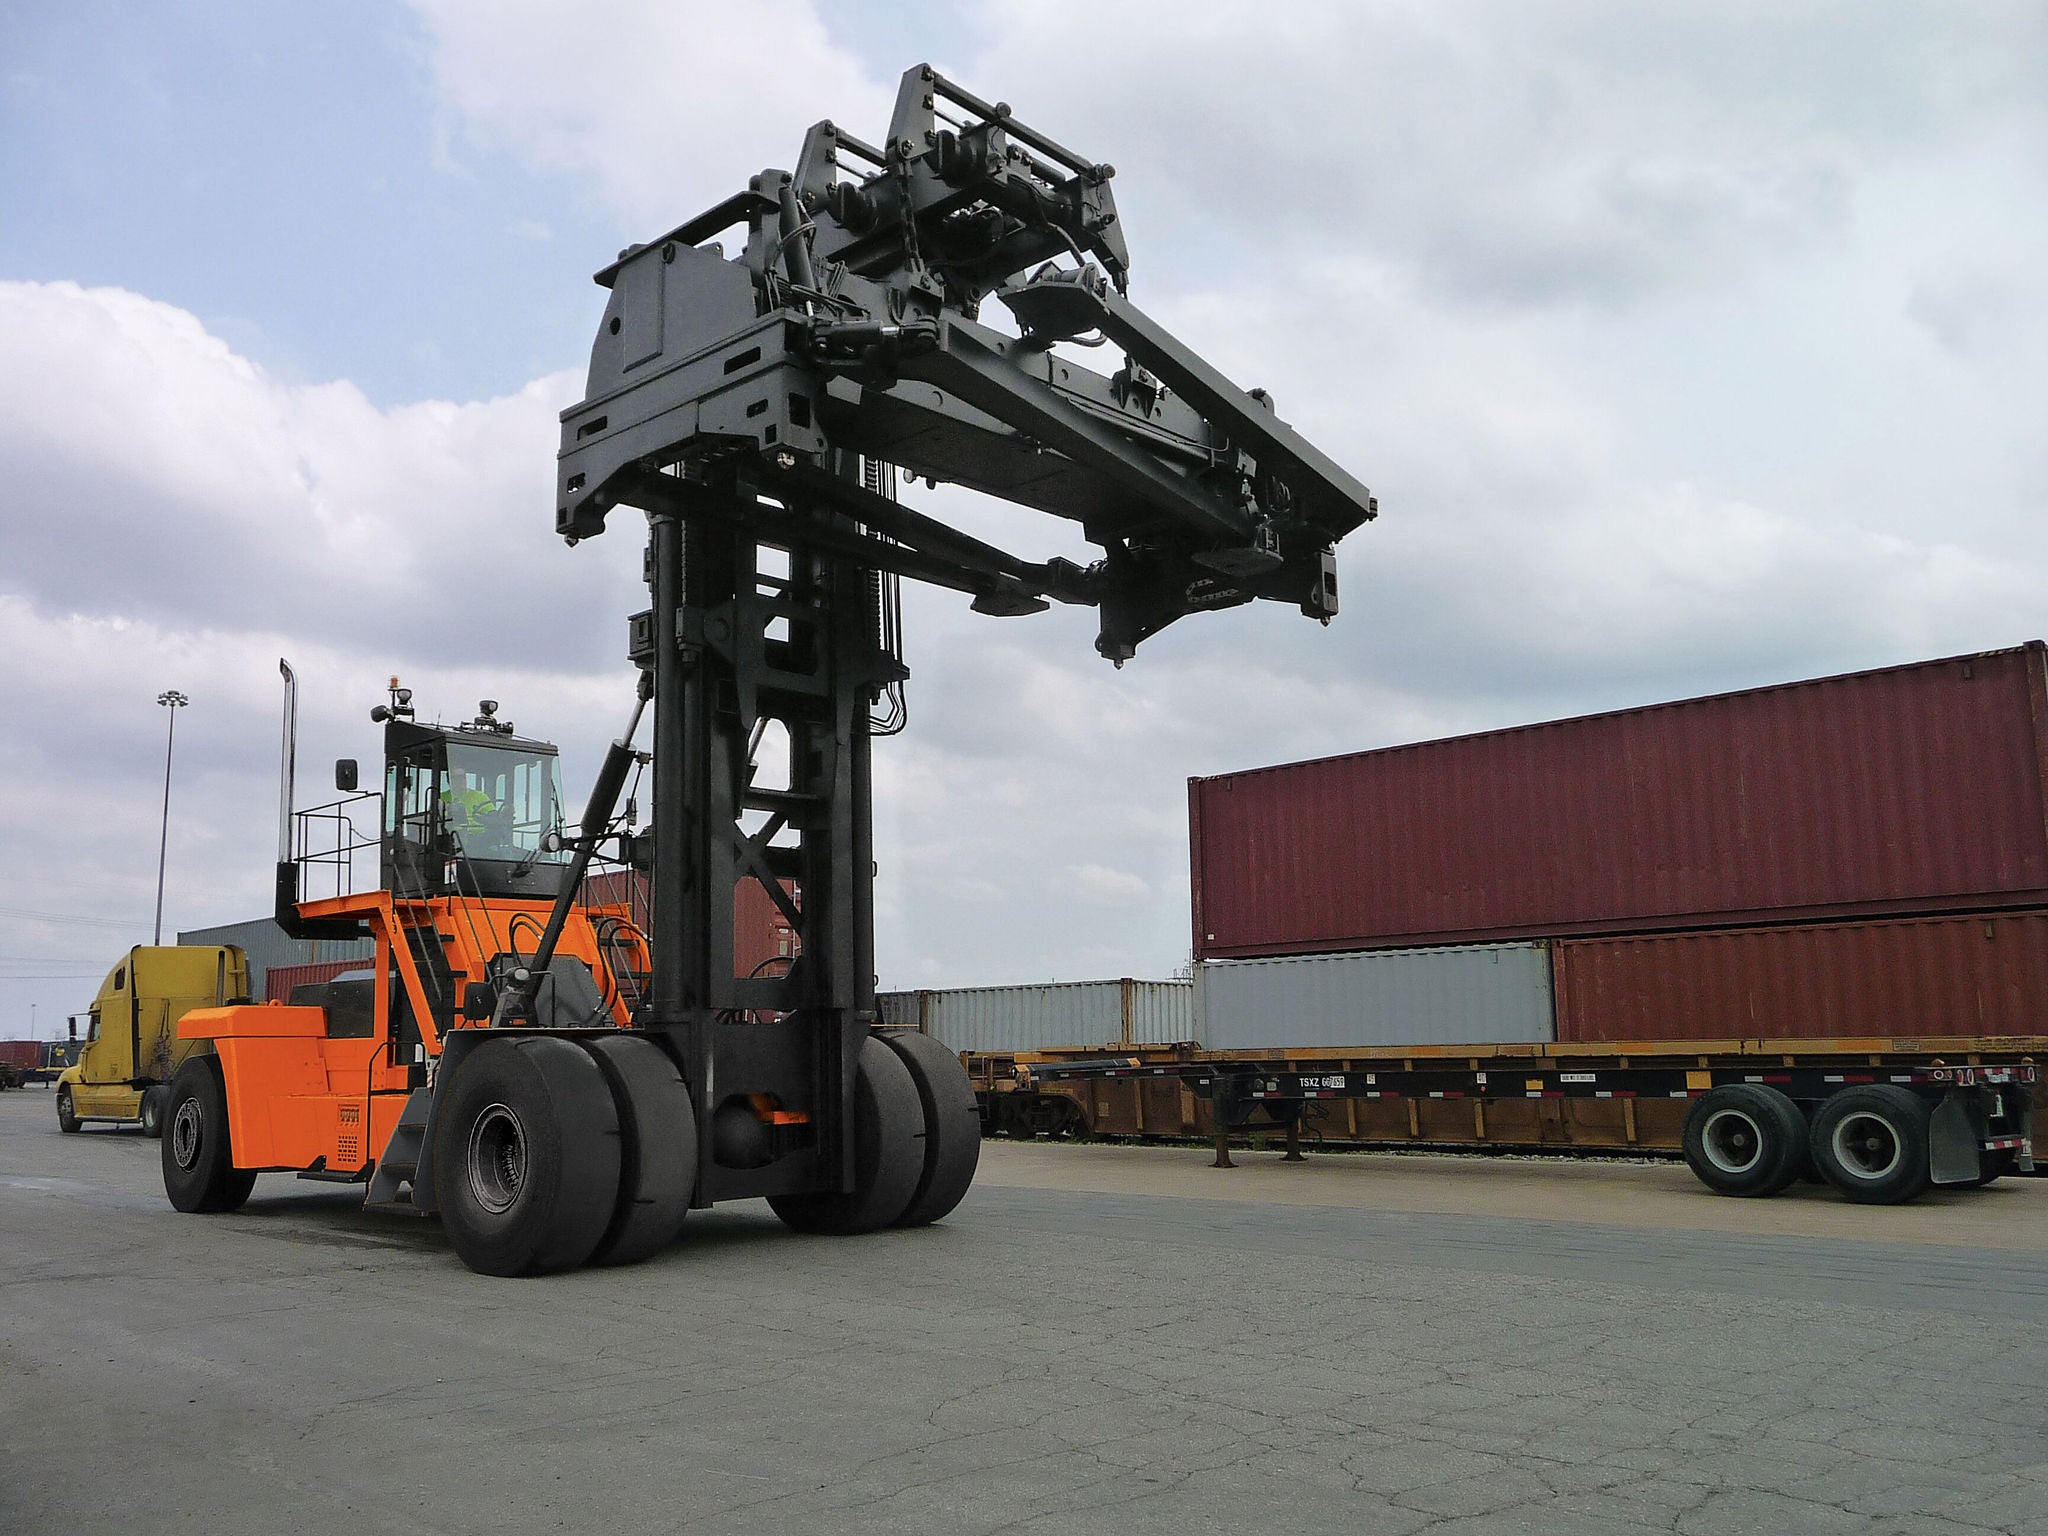 Loaded Container Handler in freight yard